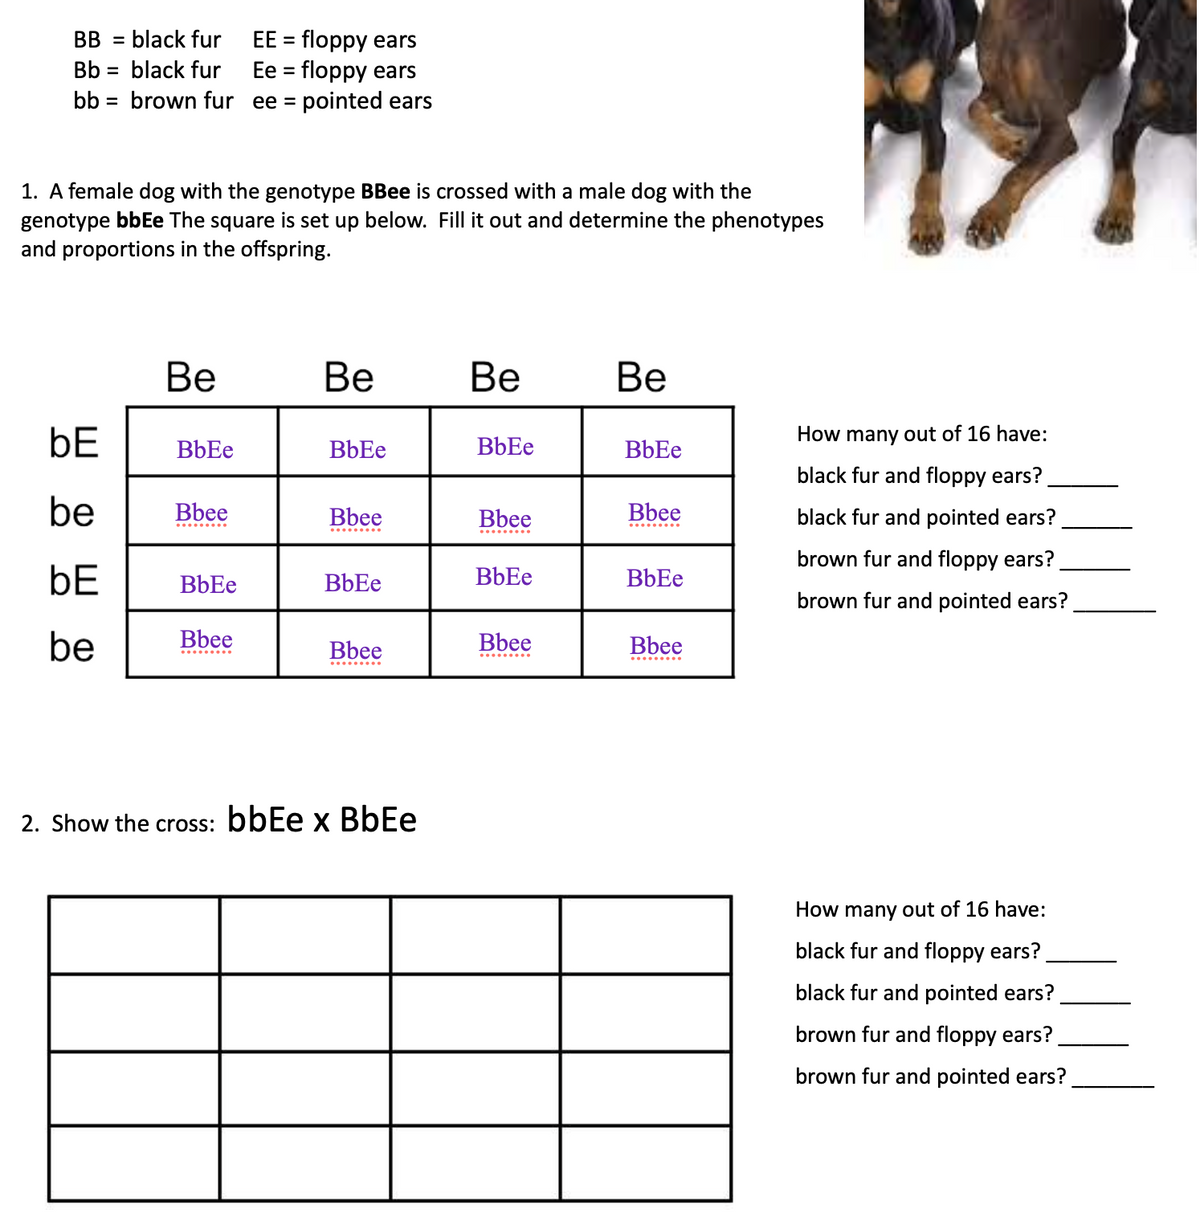 EE = floppy ears
Ee = floppy ears
bb = brown fur ee = pointed ears
BB = black fur
%3D
Bb = black fur
%D
%3D
1. A female dog with the genotype BBee is crossed with a male dog with the
genotype bbEe The square is set up below. Fill it out and determine the phenotypes
and proportions in the offspring.
Ве
Ве
Ве
Ве
bE
BbEe
BbEe
How many out of 16 have:
black fur and floppy ears?
be
Bbee
Bbee
Bbee
Bbee
black fur and pointed ears?
brown fur and floppy ears?
bE
BbEe
BbEe
BbEe
brown fur and pointed ears?
be
Bbee
Bbee
Bbee
Bbee
.. ...
2. Show the cross: bbEe x BbEe
How many out of 16 have:
black fur and floppy ears?
black fur and pointed ears?
I floppy ears?
own
brown fur and pointed ears?
